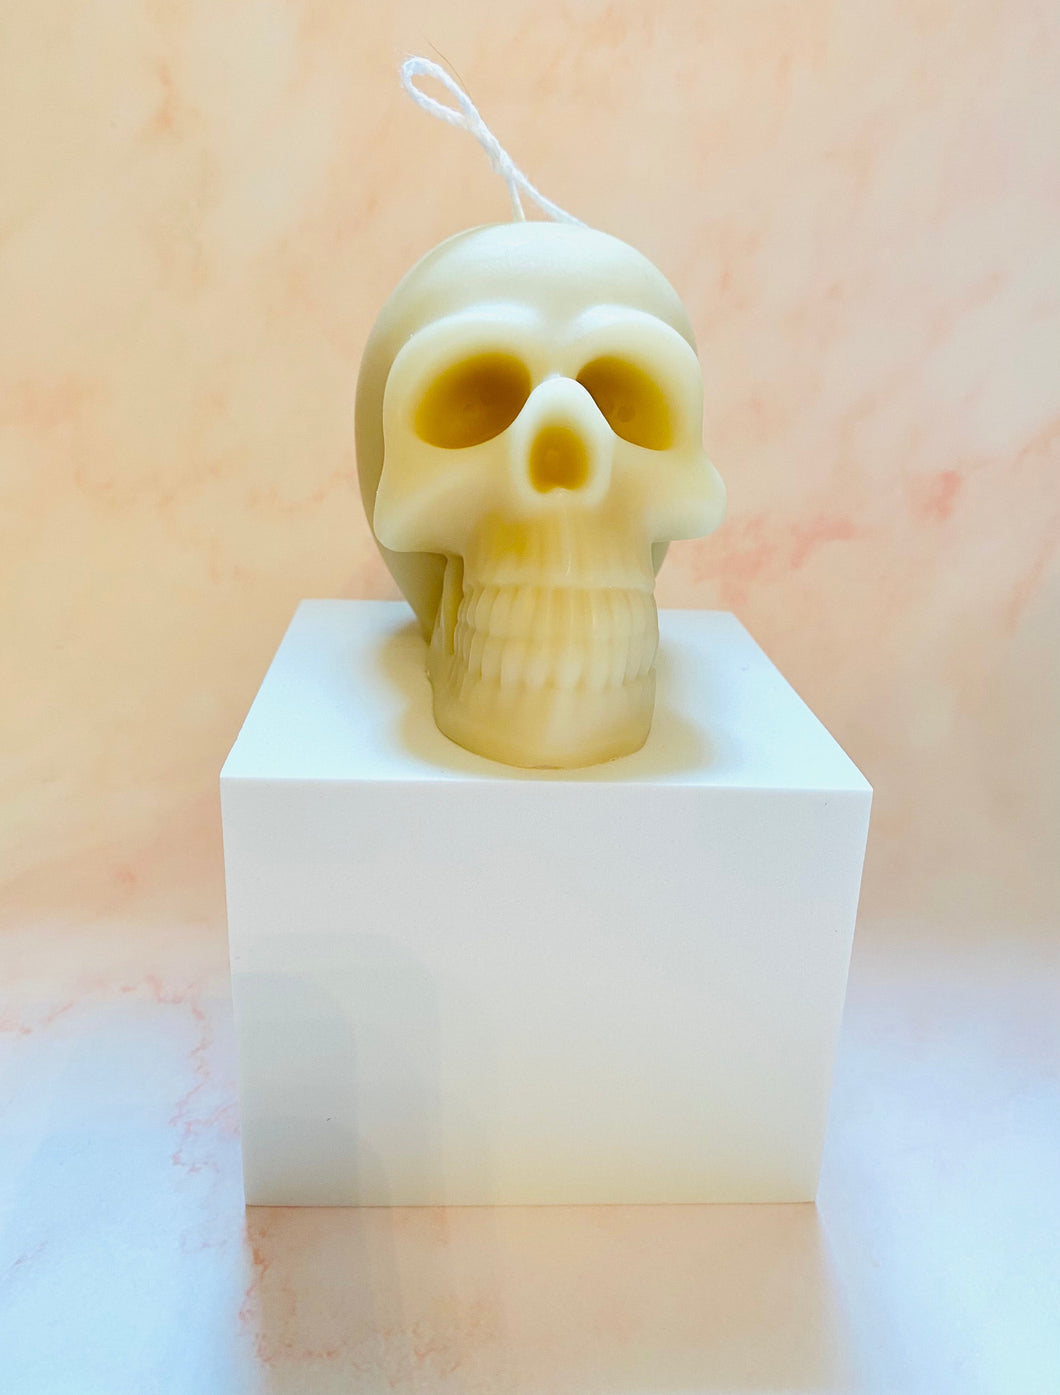 Skull Beeswax Candle